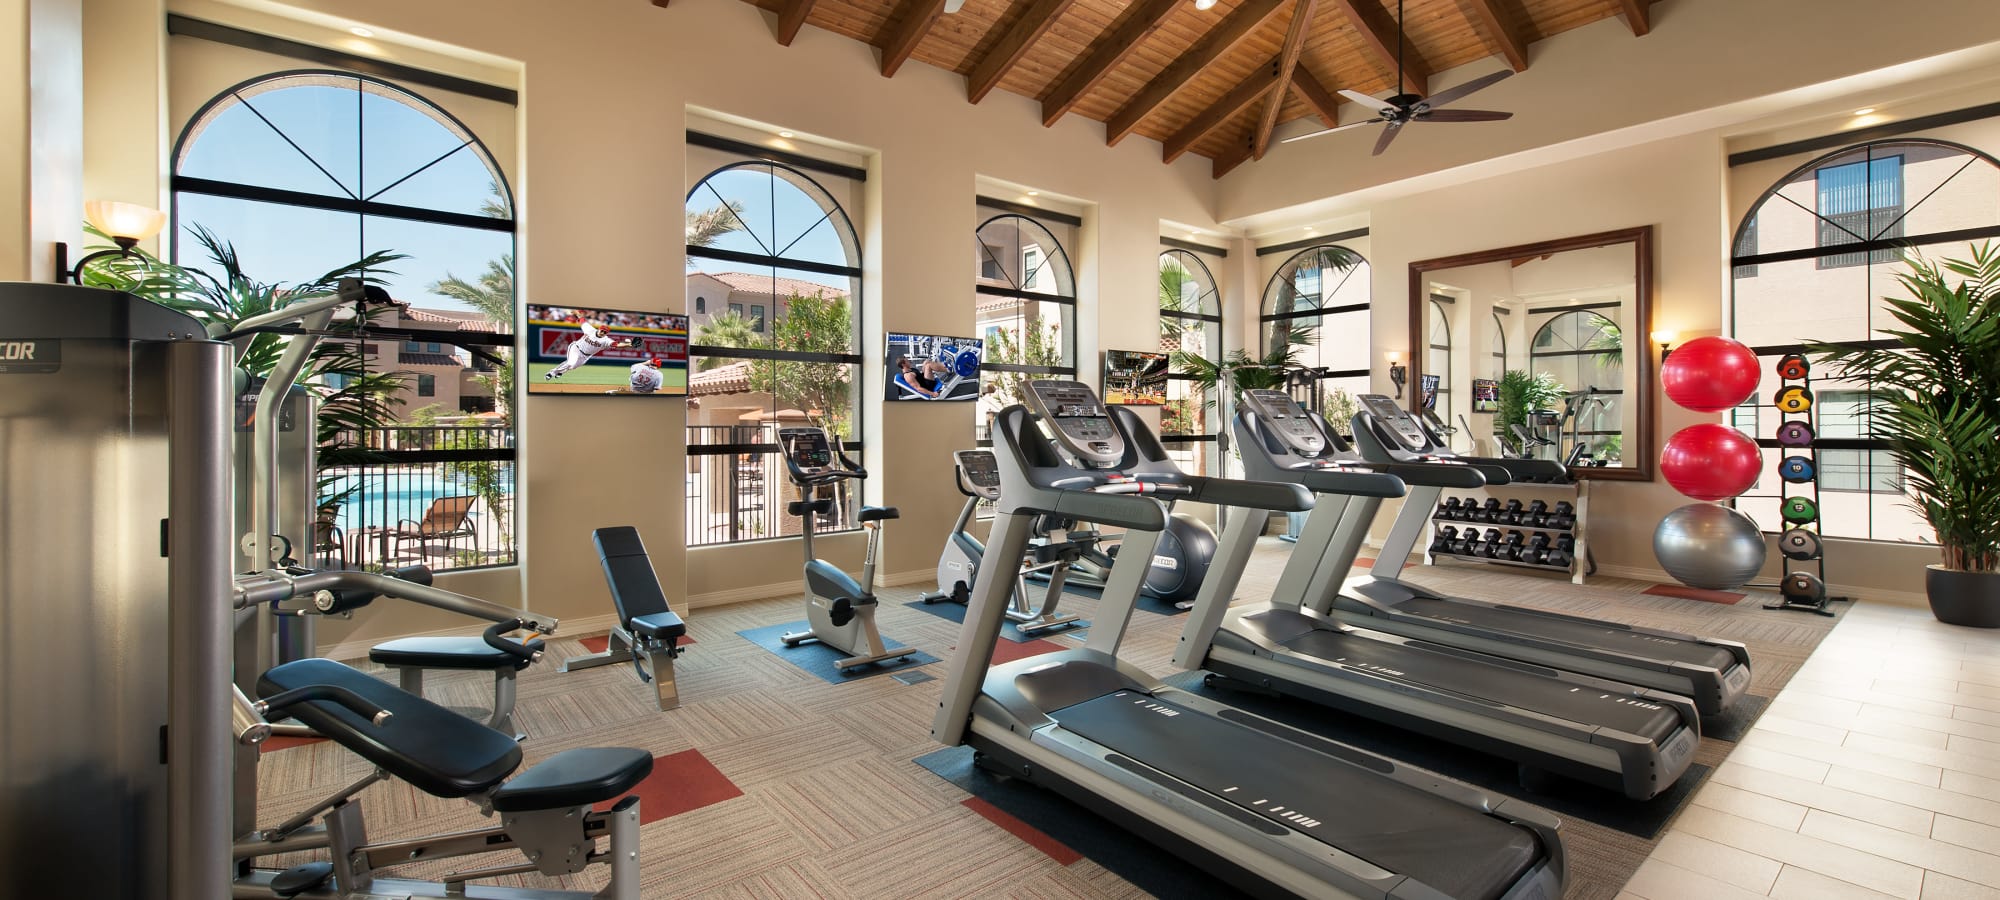 Well-equipped fitness center at San Paseo in Phoenix, Arizona